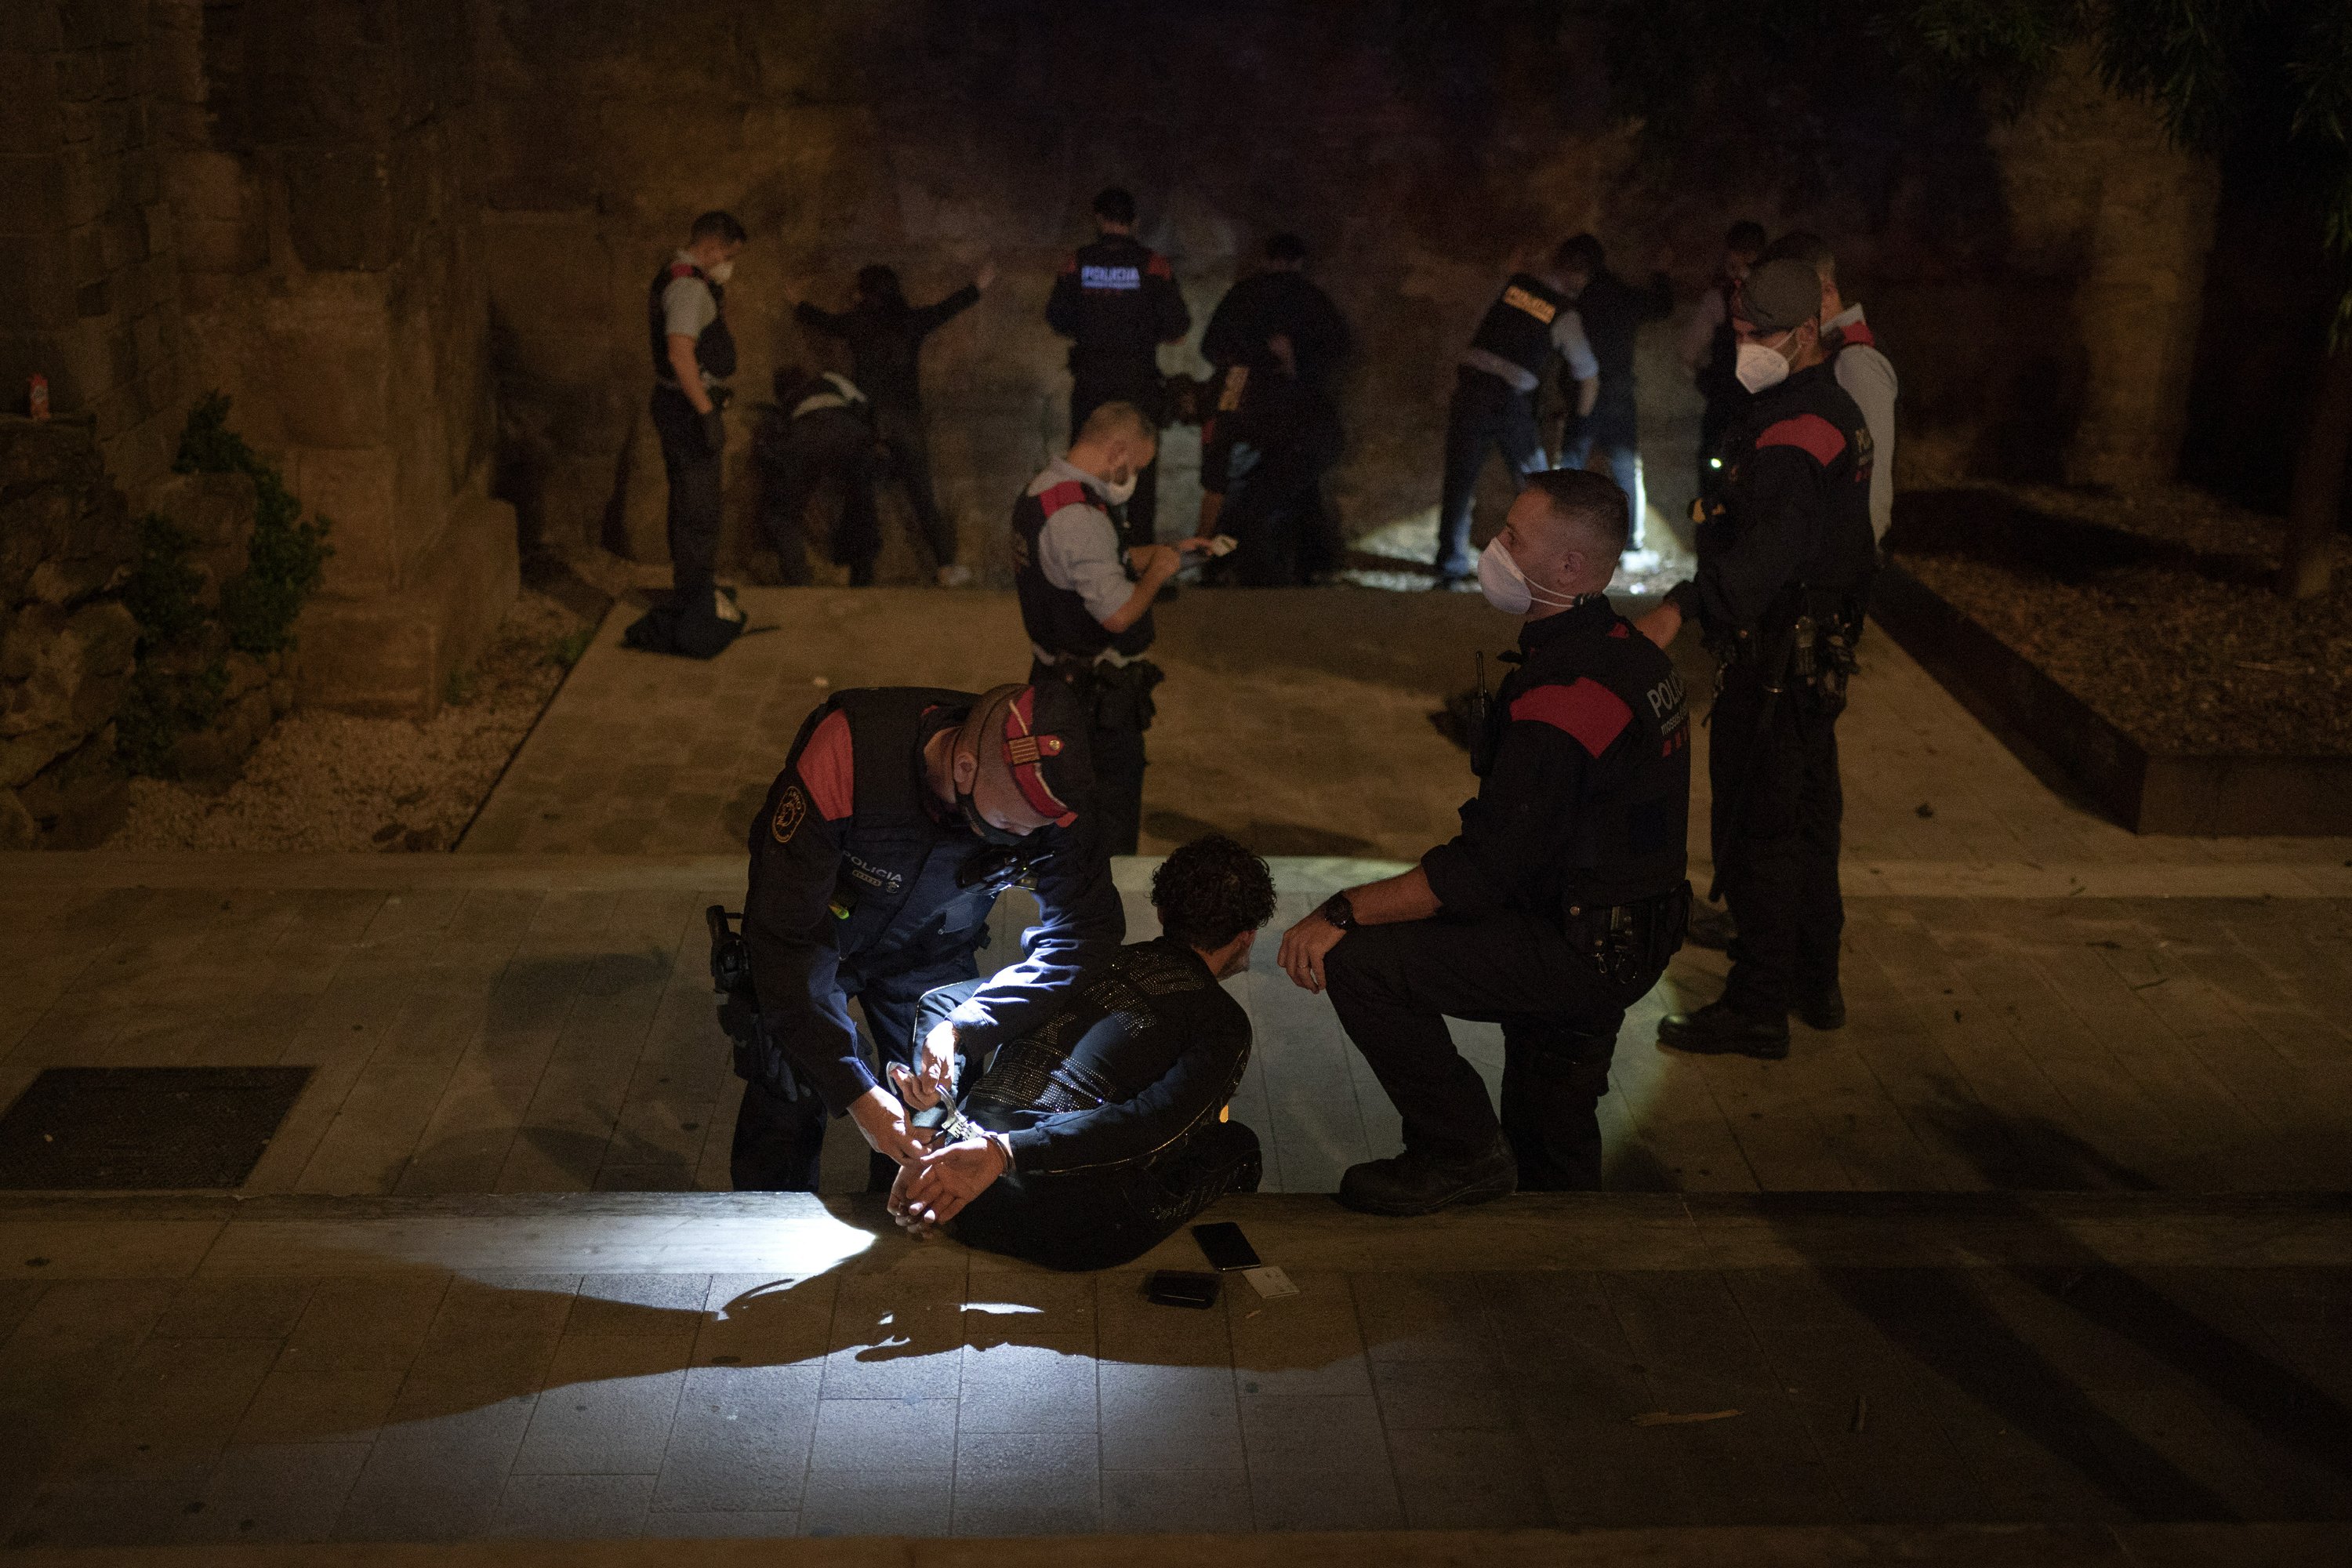 Police on curfew patrol as Spain fights nightlife infections... thumbnail